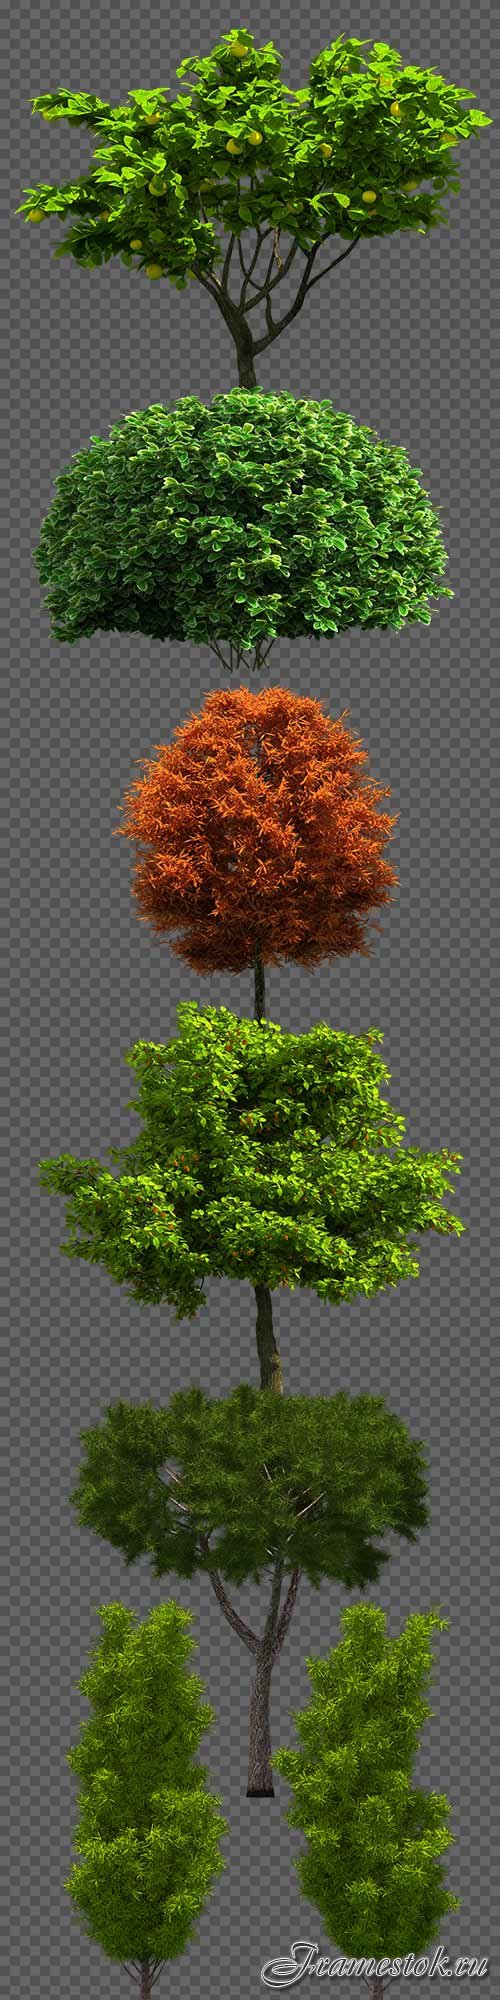 Trees on a transparent background PNG - 7